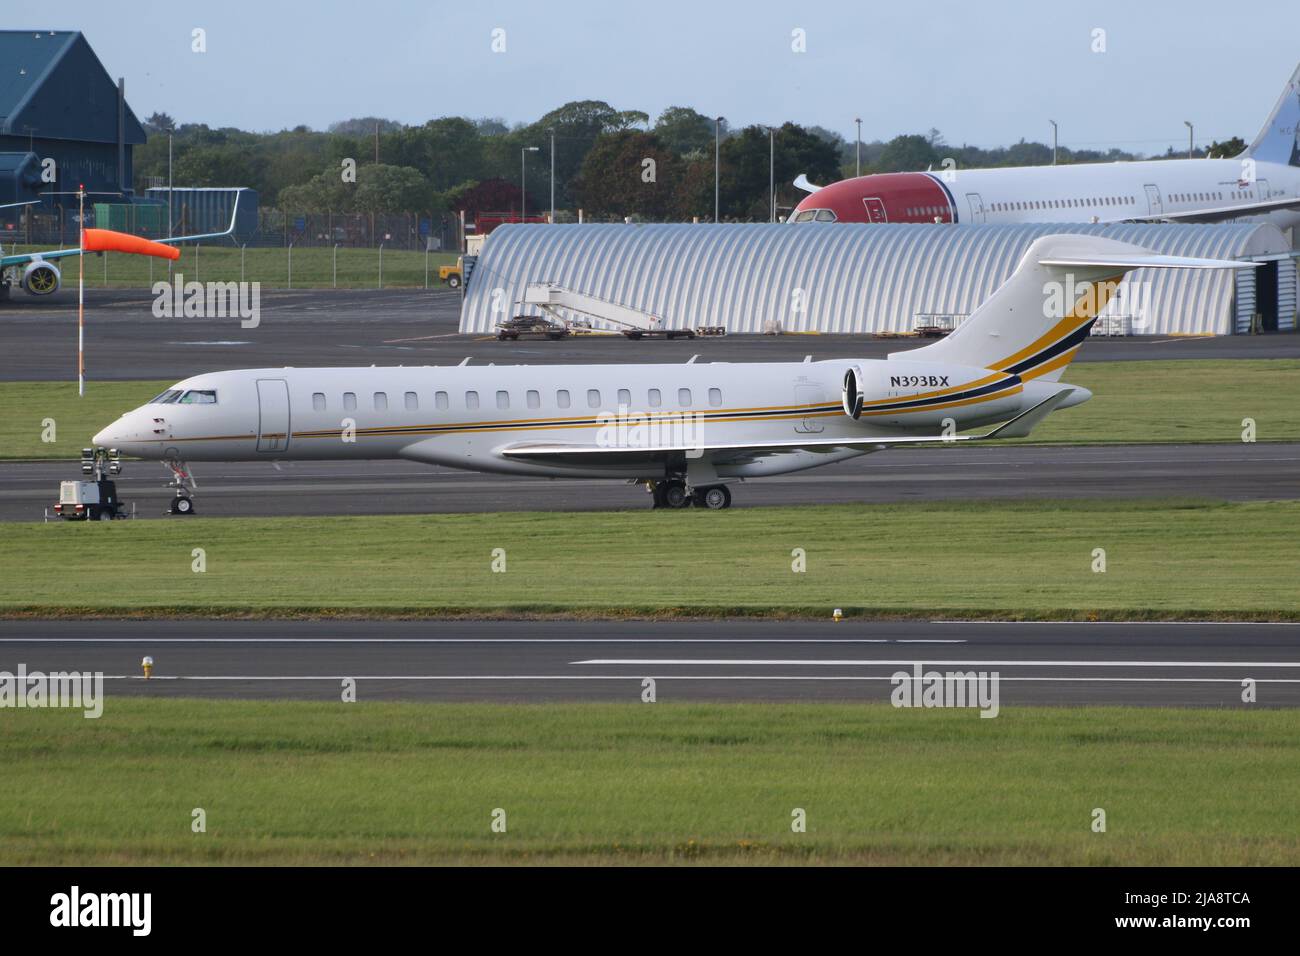 N393BX, a Bombardier BD-700-2A12 Global 7500 owned by Bombardier Aerospace Corp, at Prestwick International Airport in Ayrshire, Scotland. Stock Photo